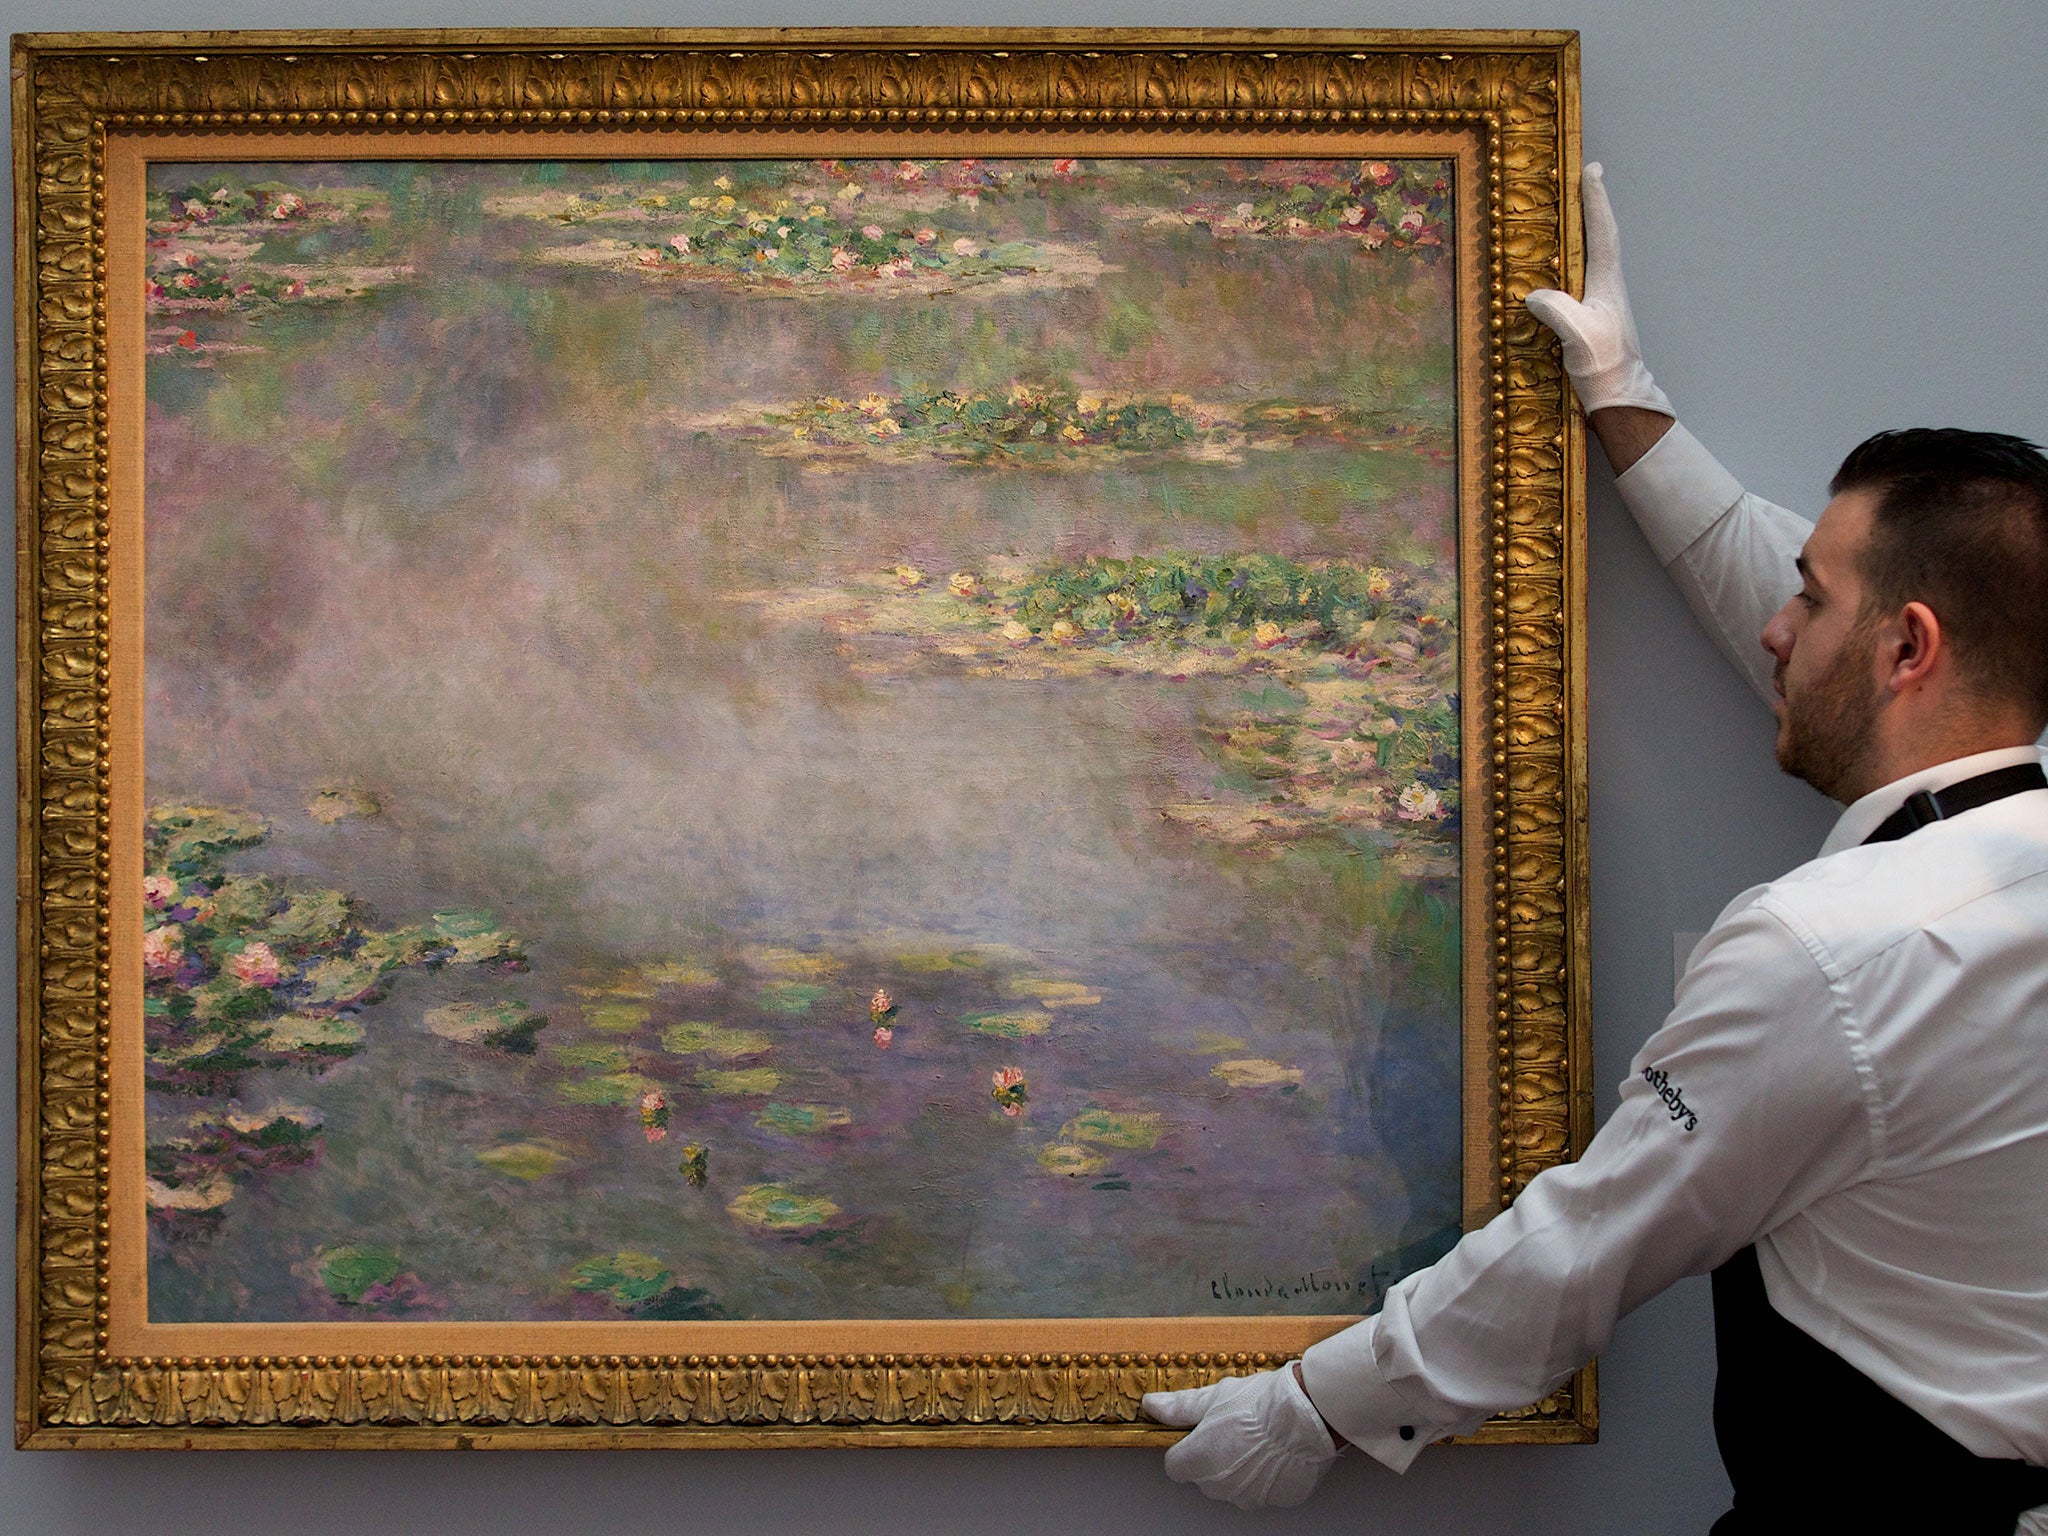 Claude Monet's 'Nympheas' sold for £32m at Sotheby's in London